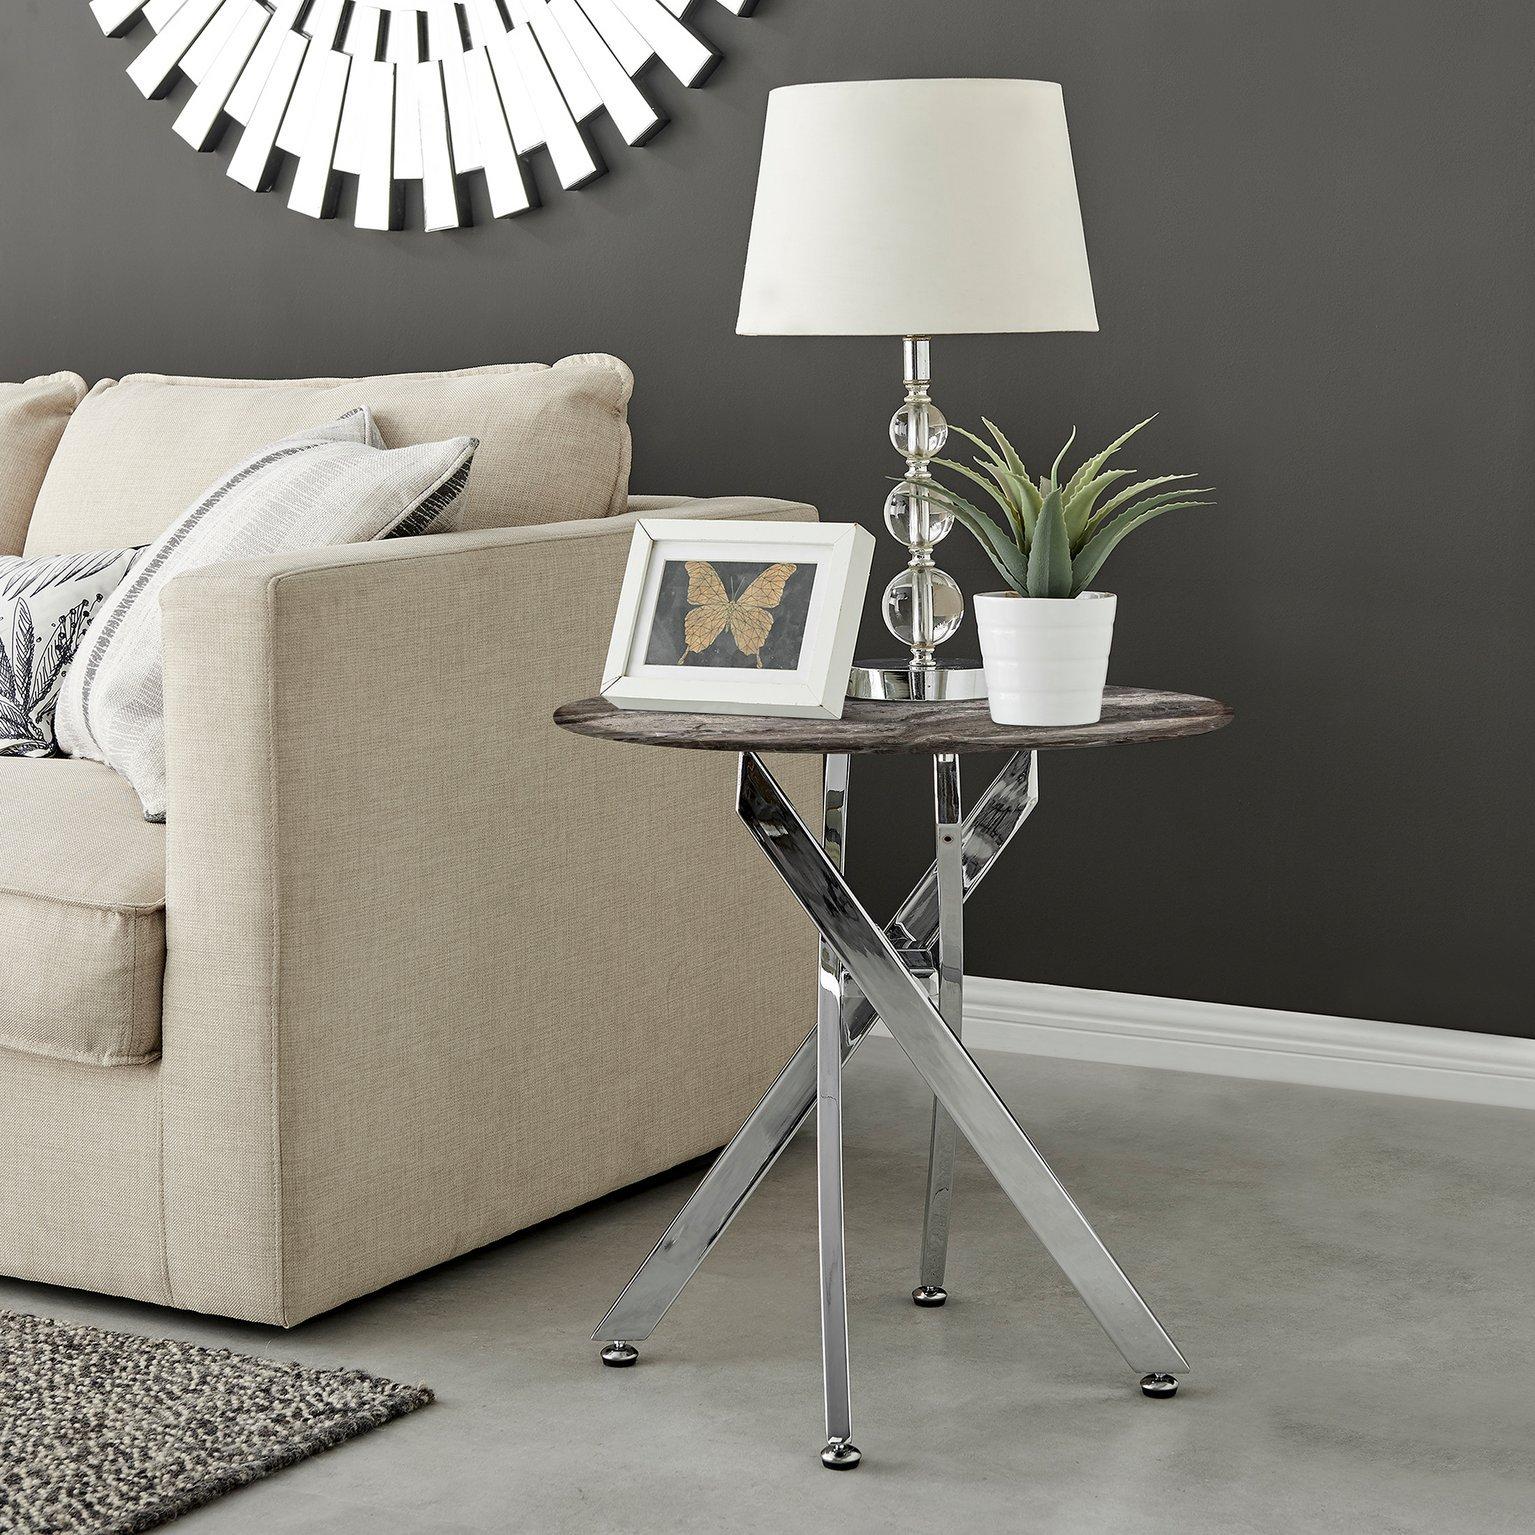 Novara Round Marble Effect Glass Top Side Table With Silver Metal Starburst Legs